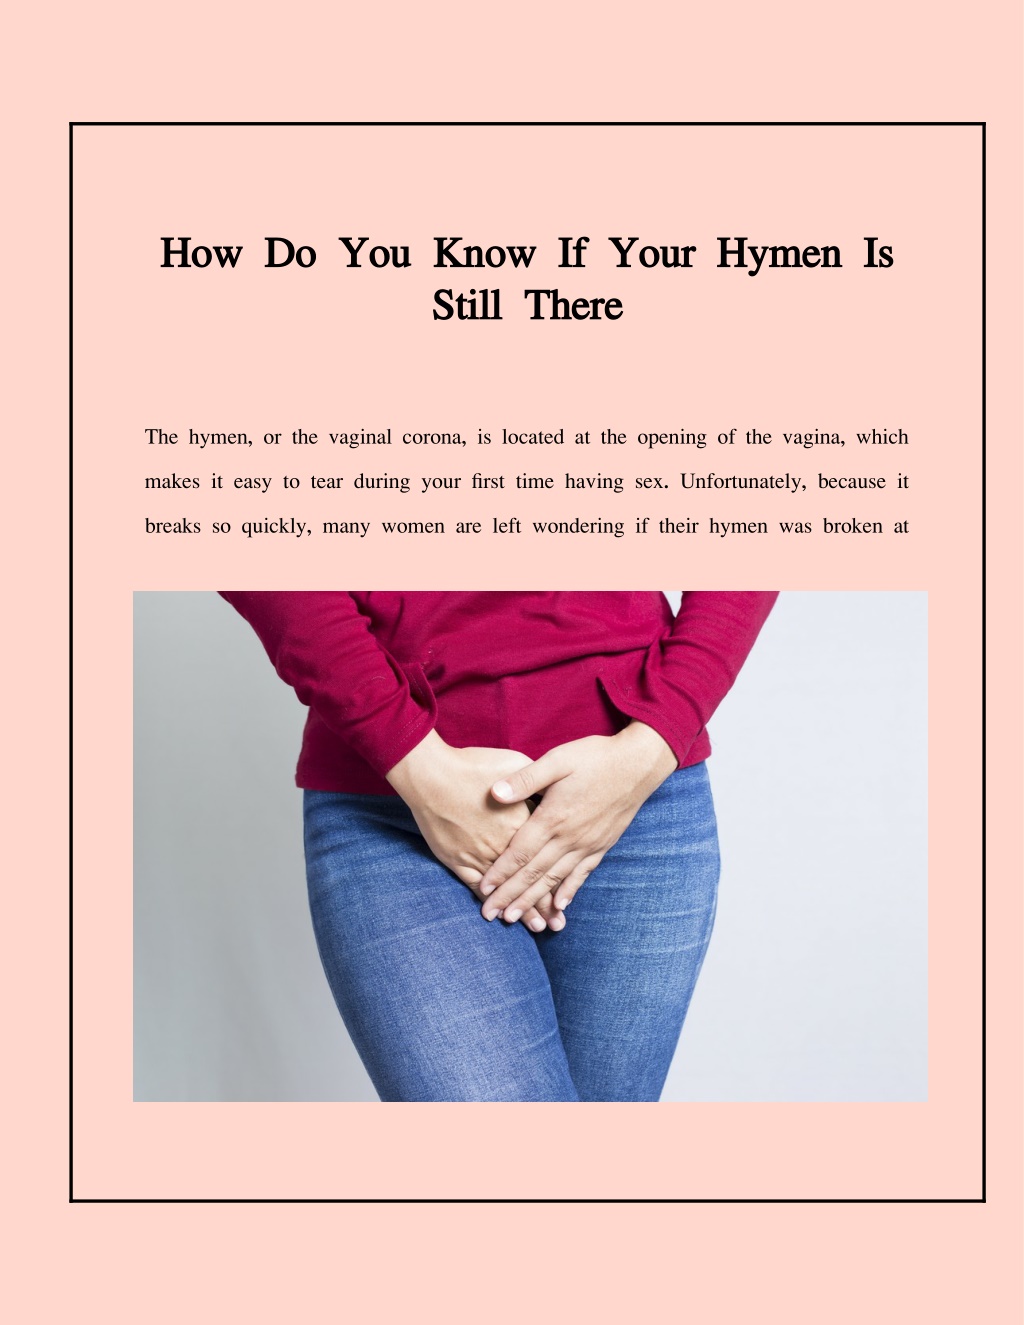 Ppt How Do You Tell If Your Hymen Is Still Present Powerpoint Presentation Id 12023860